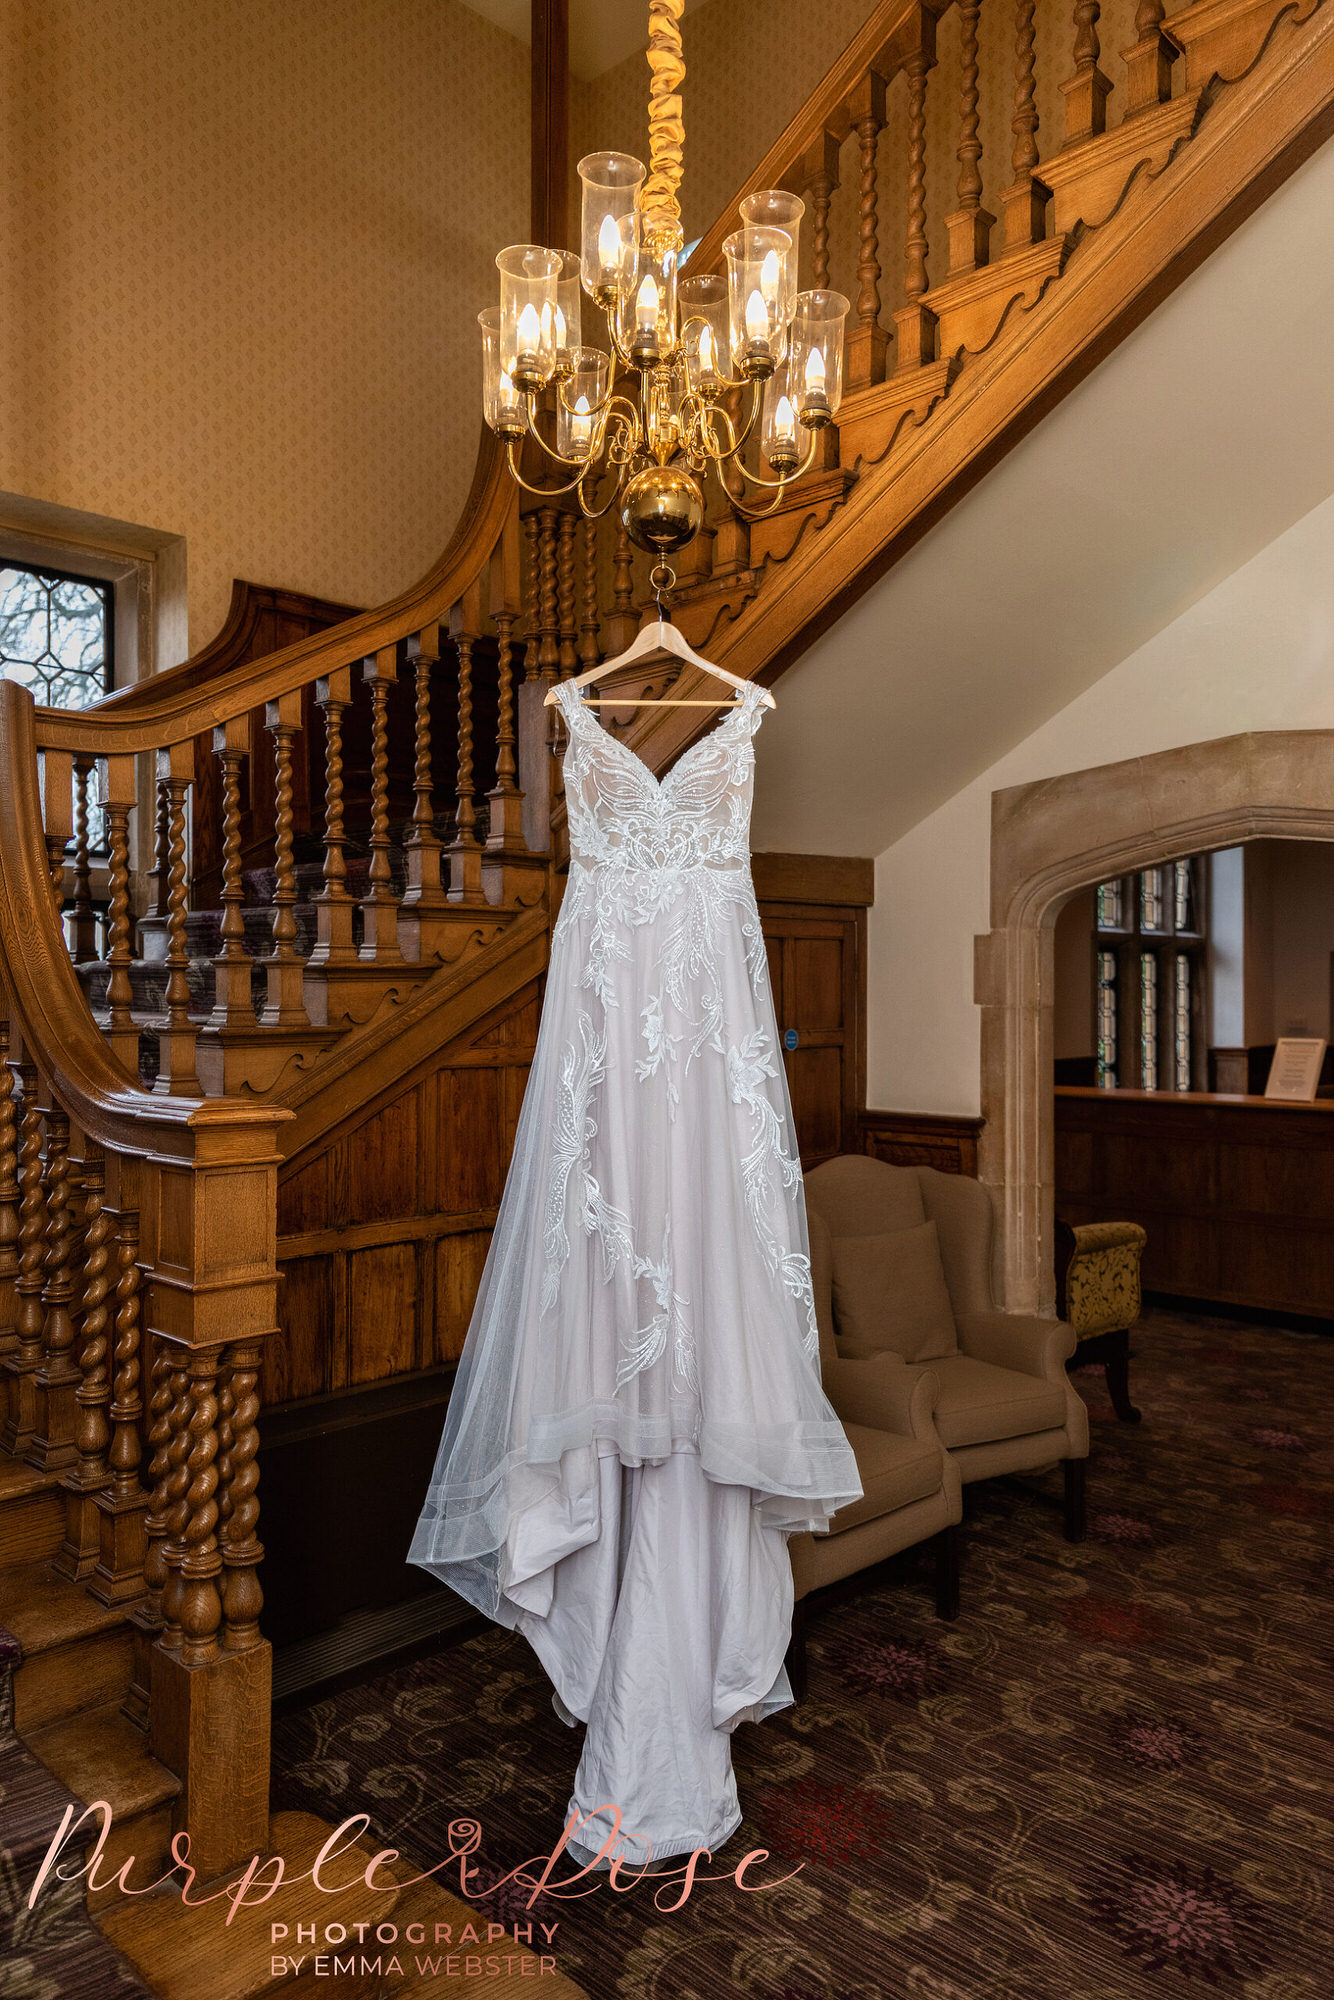 Wedding dress hanging from a chandelier